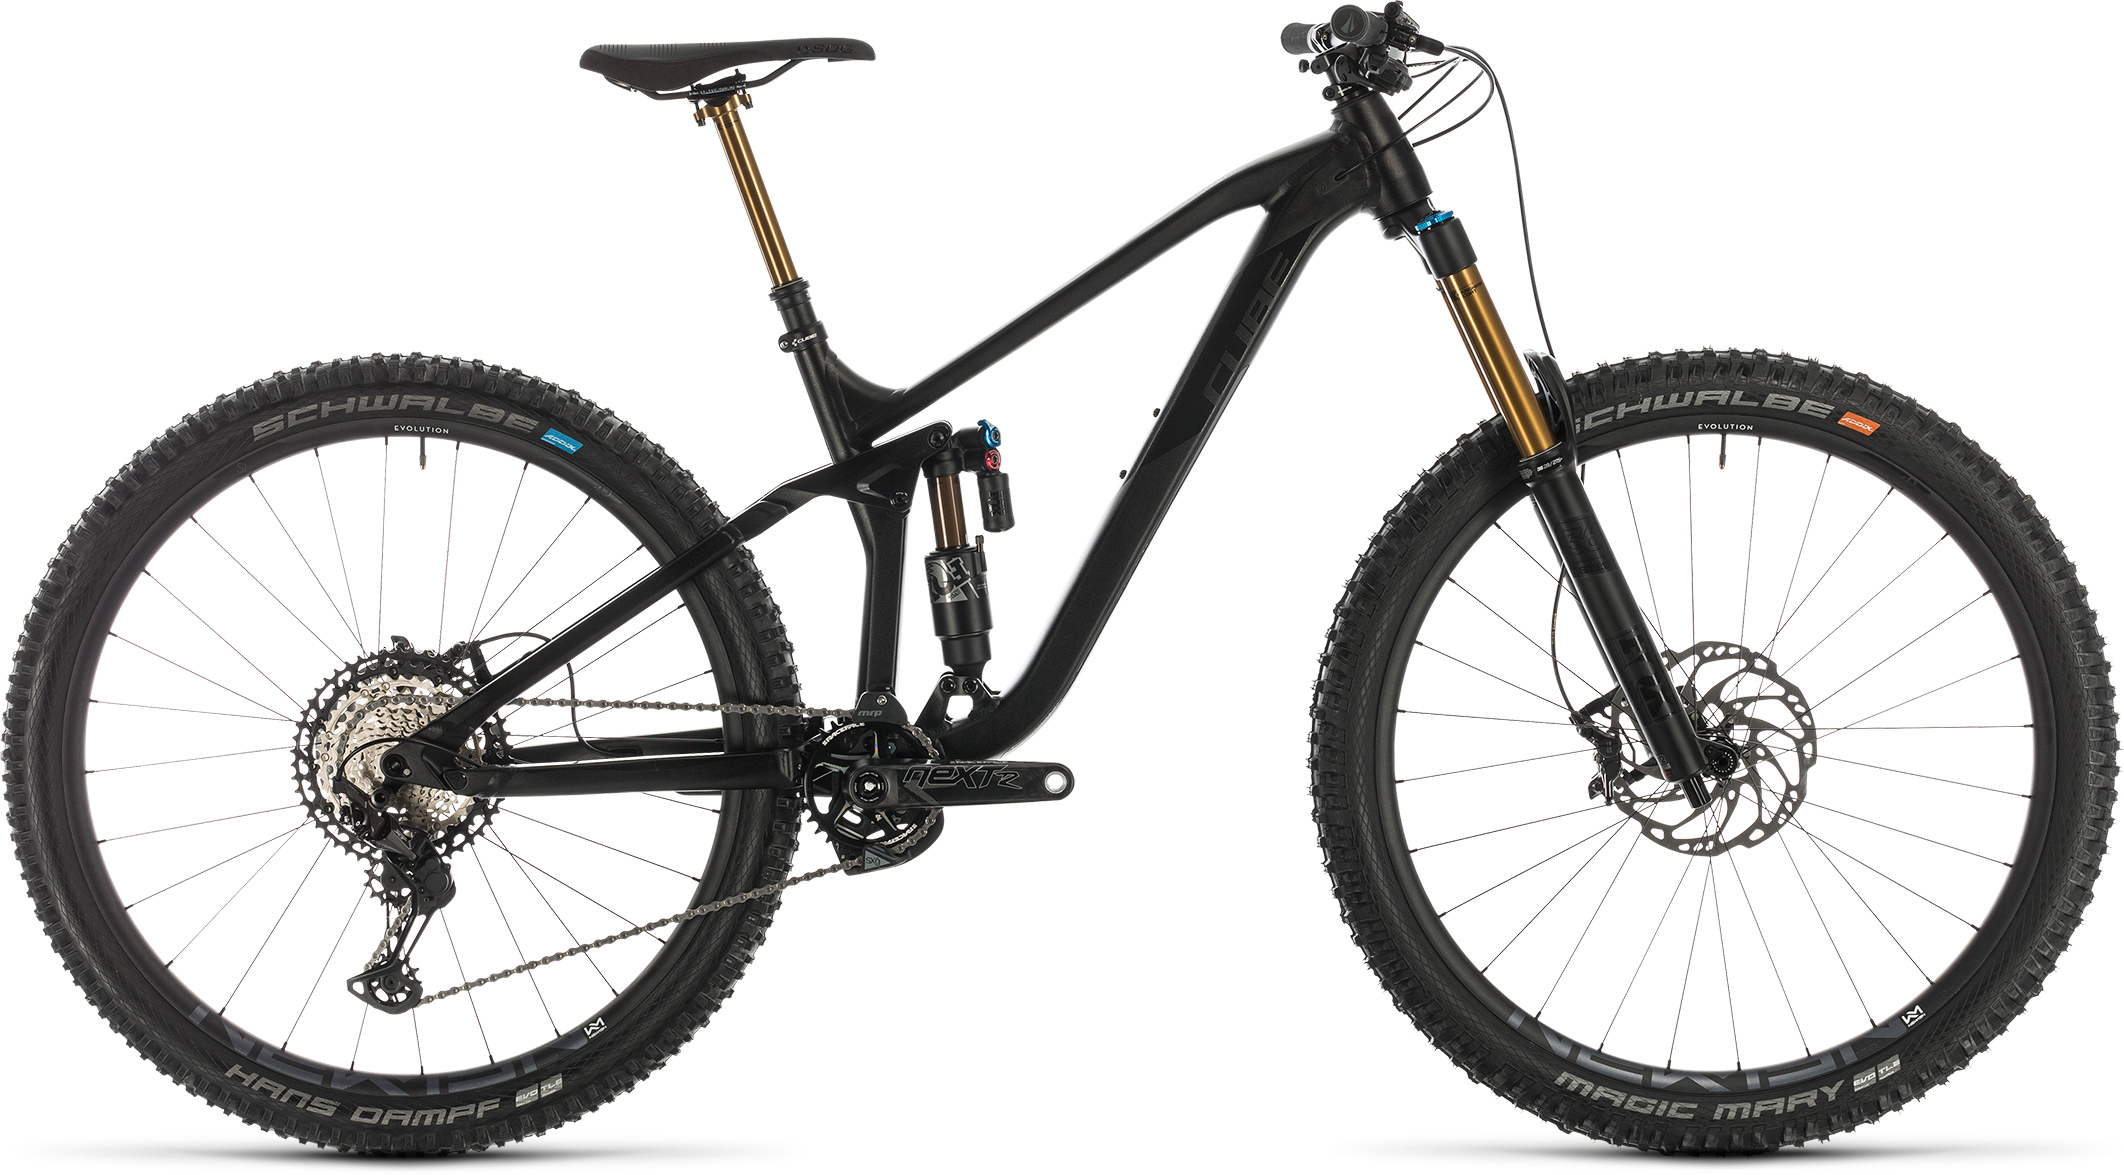 Stereo 170 SL 29 black anodized | Bouticycle